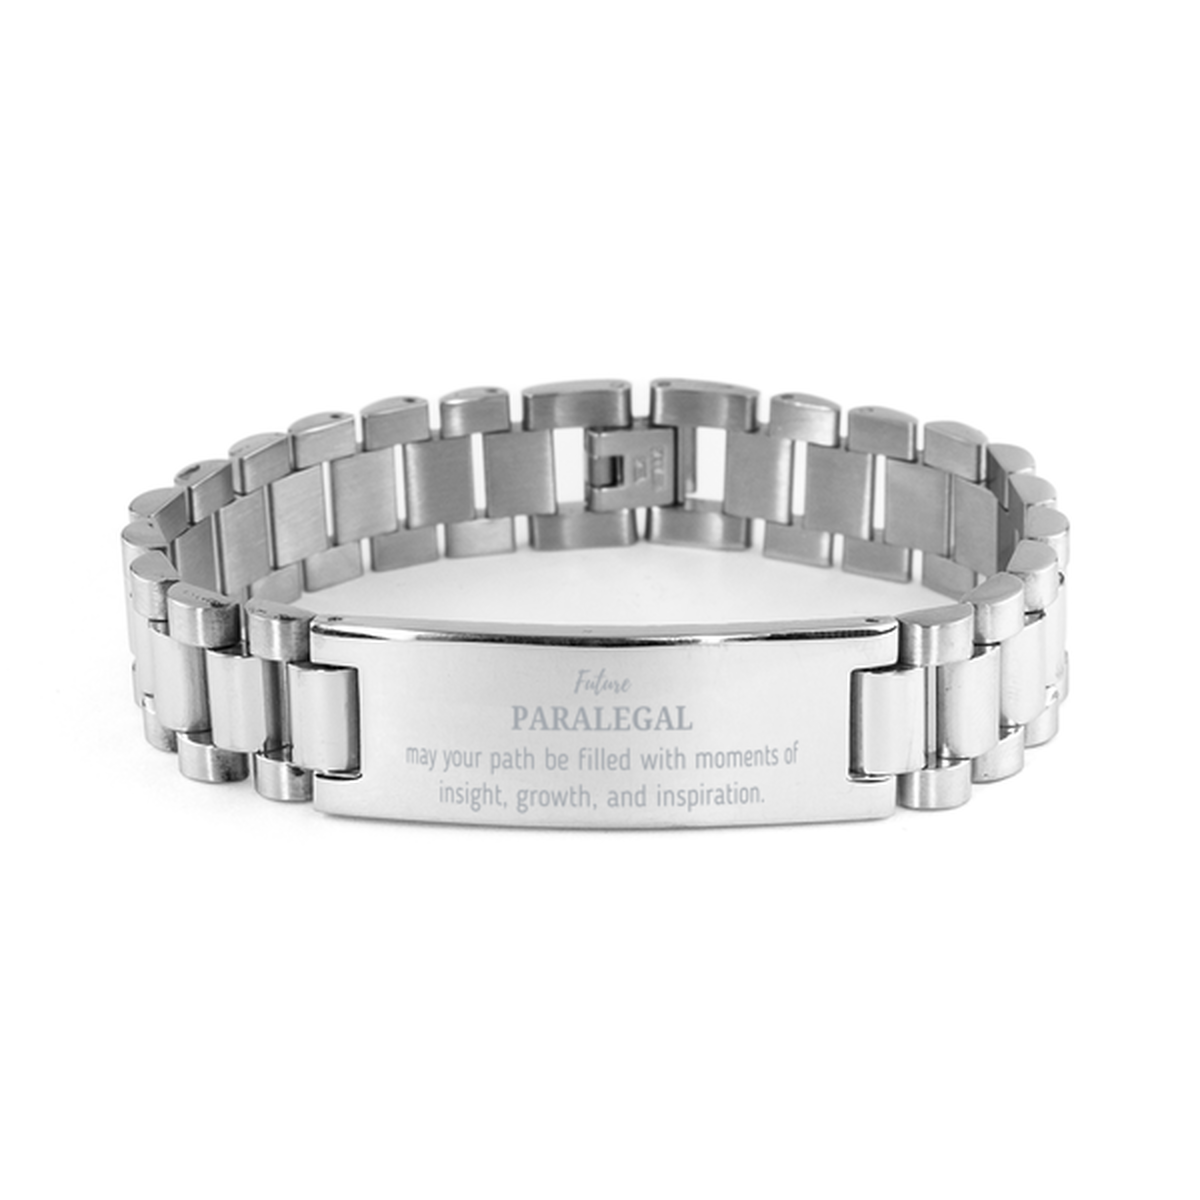 Future Paralegal Gifts, May your path be filled with moments of insight, Graduation Gifts for New Paralegal, Christmas Unique Ladder Stainless Steel Bracelet For Men, Women, Friends